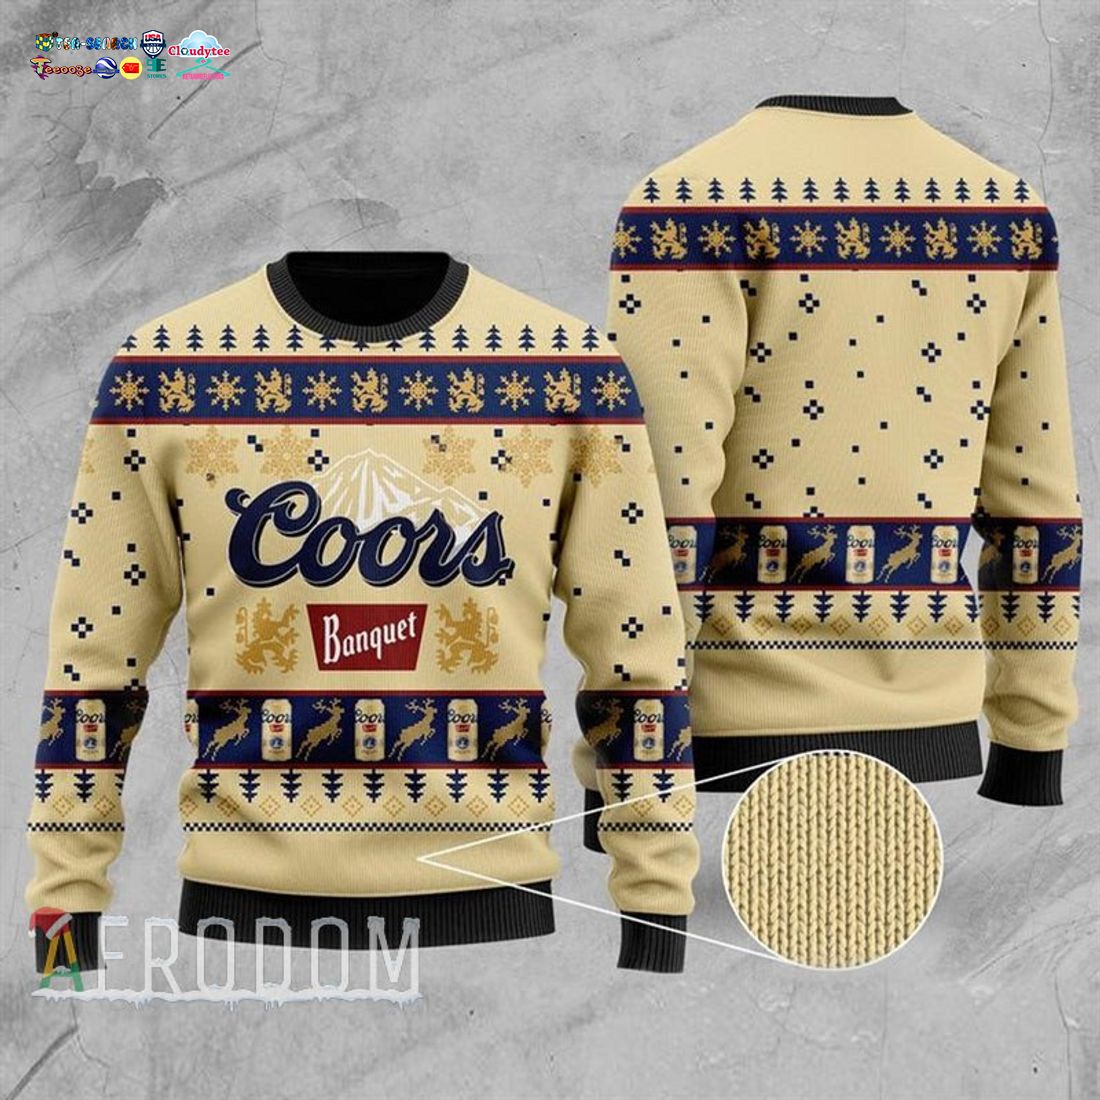 Coors Banquet Ver 3 Ugly Christmas Sweater